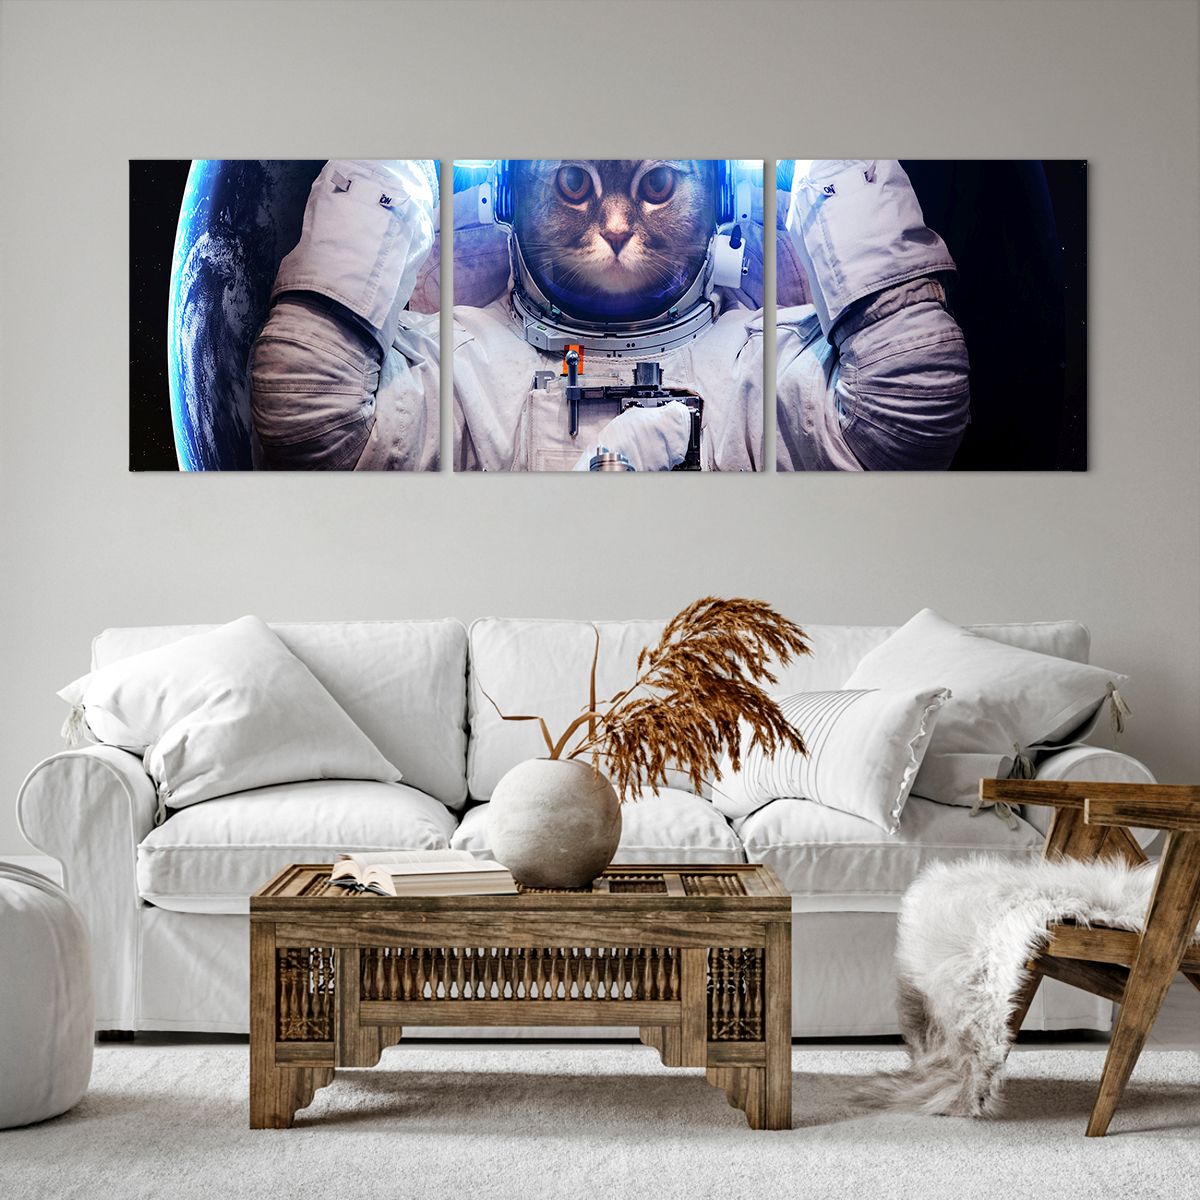 Impression sur toile Abstraction, Impression sur toile Astronaute, Impression sur toile Cosmos, Impression sur toile Art, Impression sur toile Chat